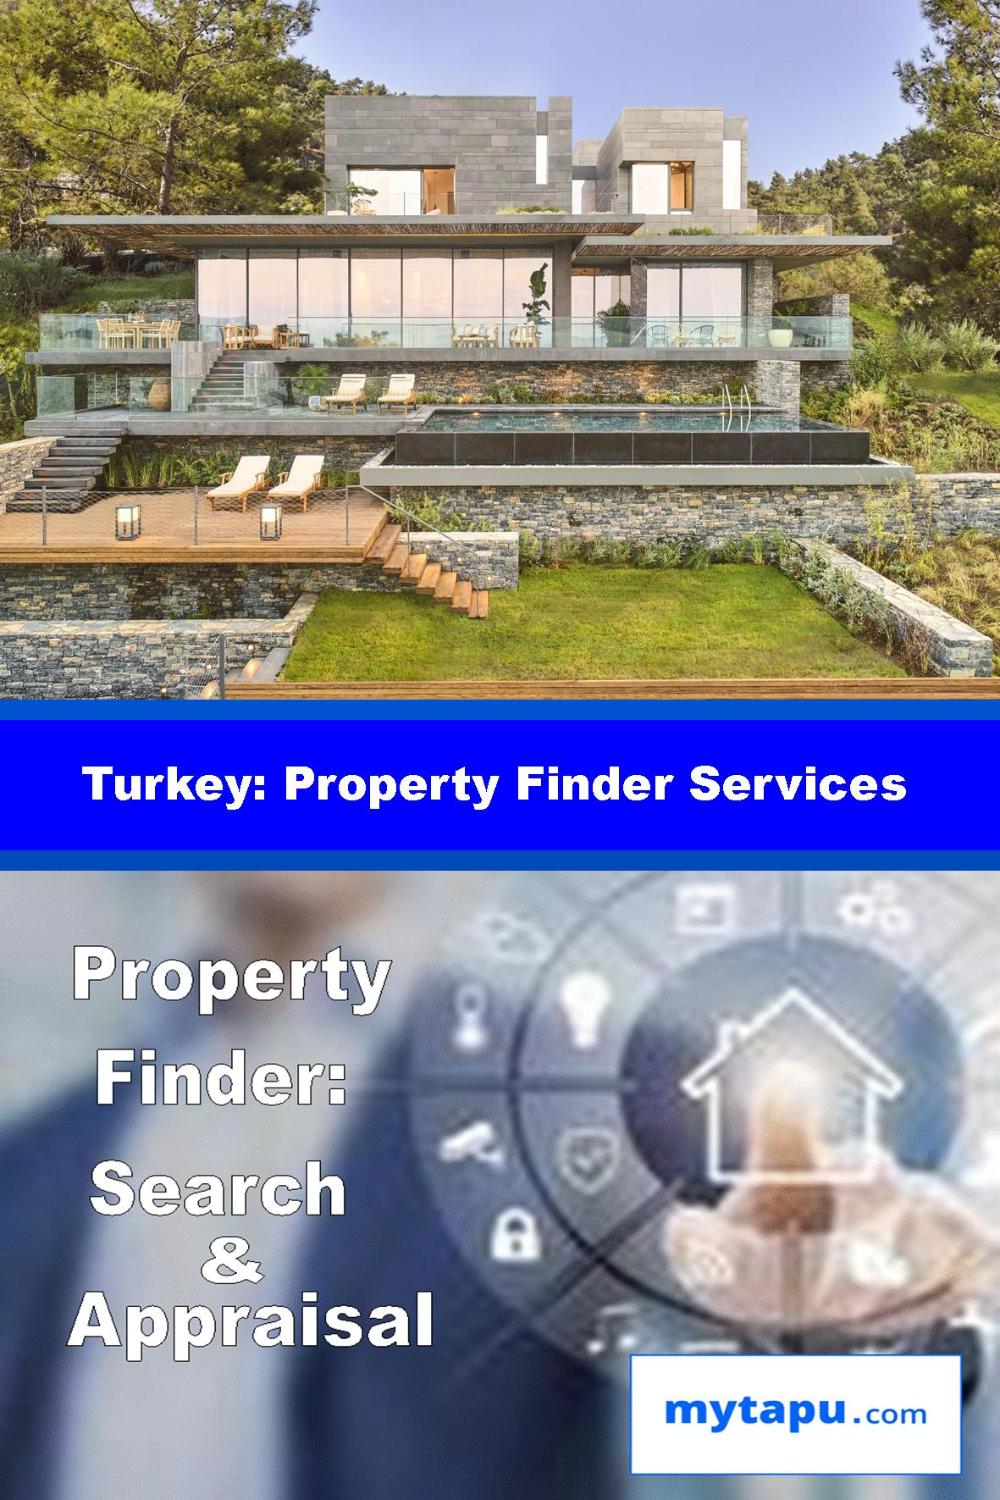 Turkey Coastal Luxury Exclusive Residential Locations for Property Investment